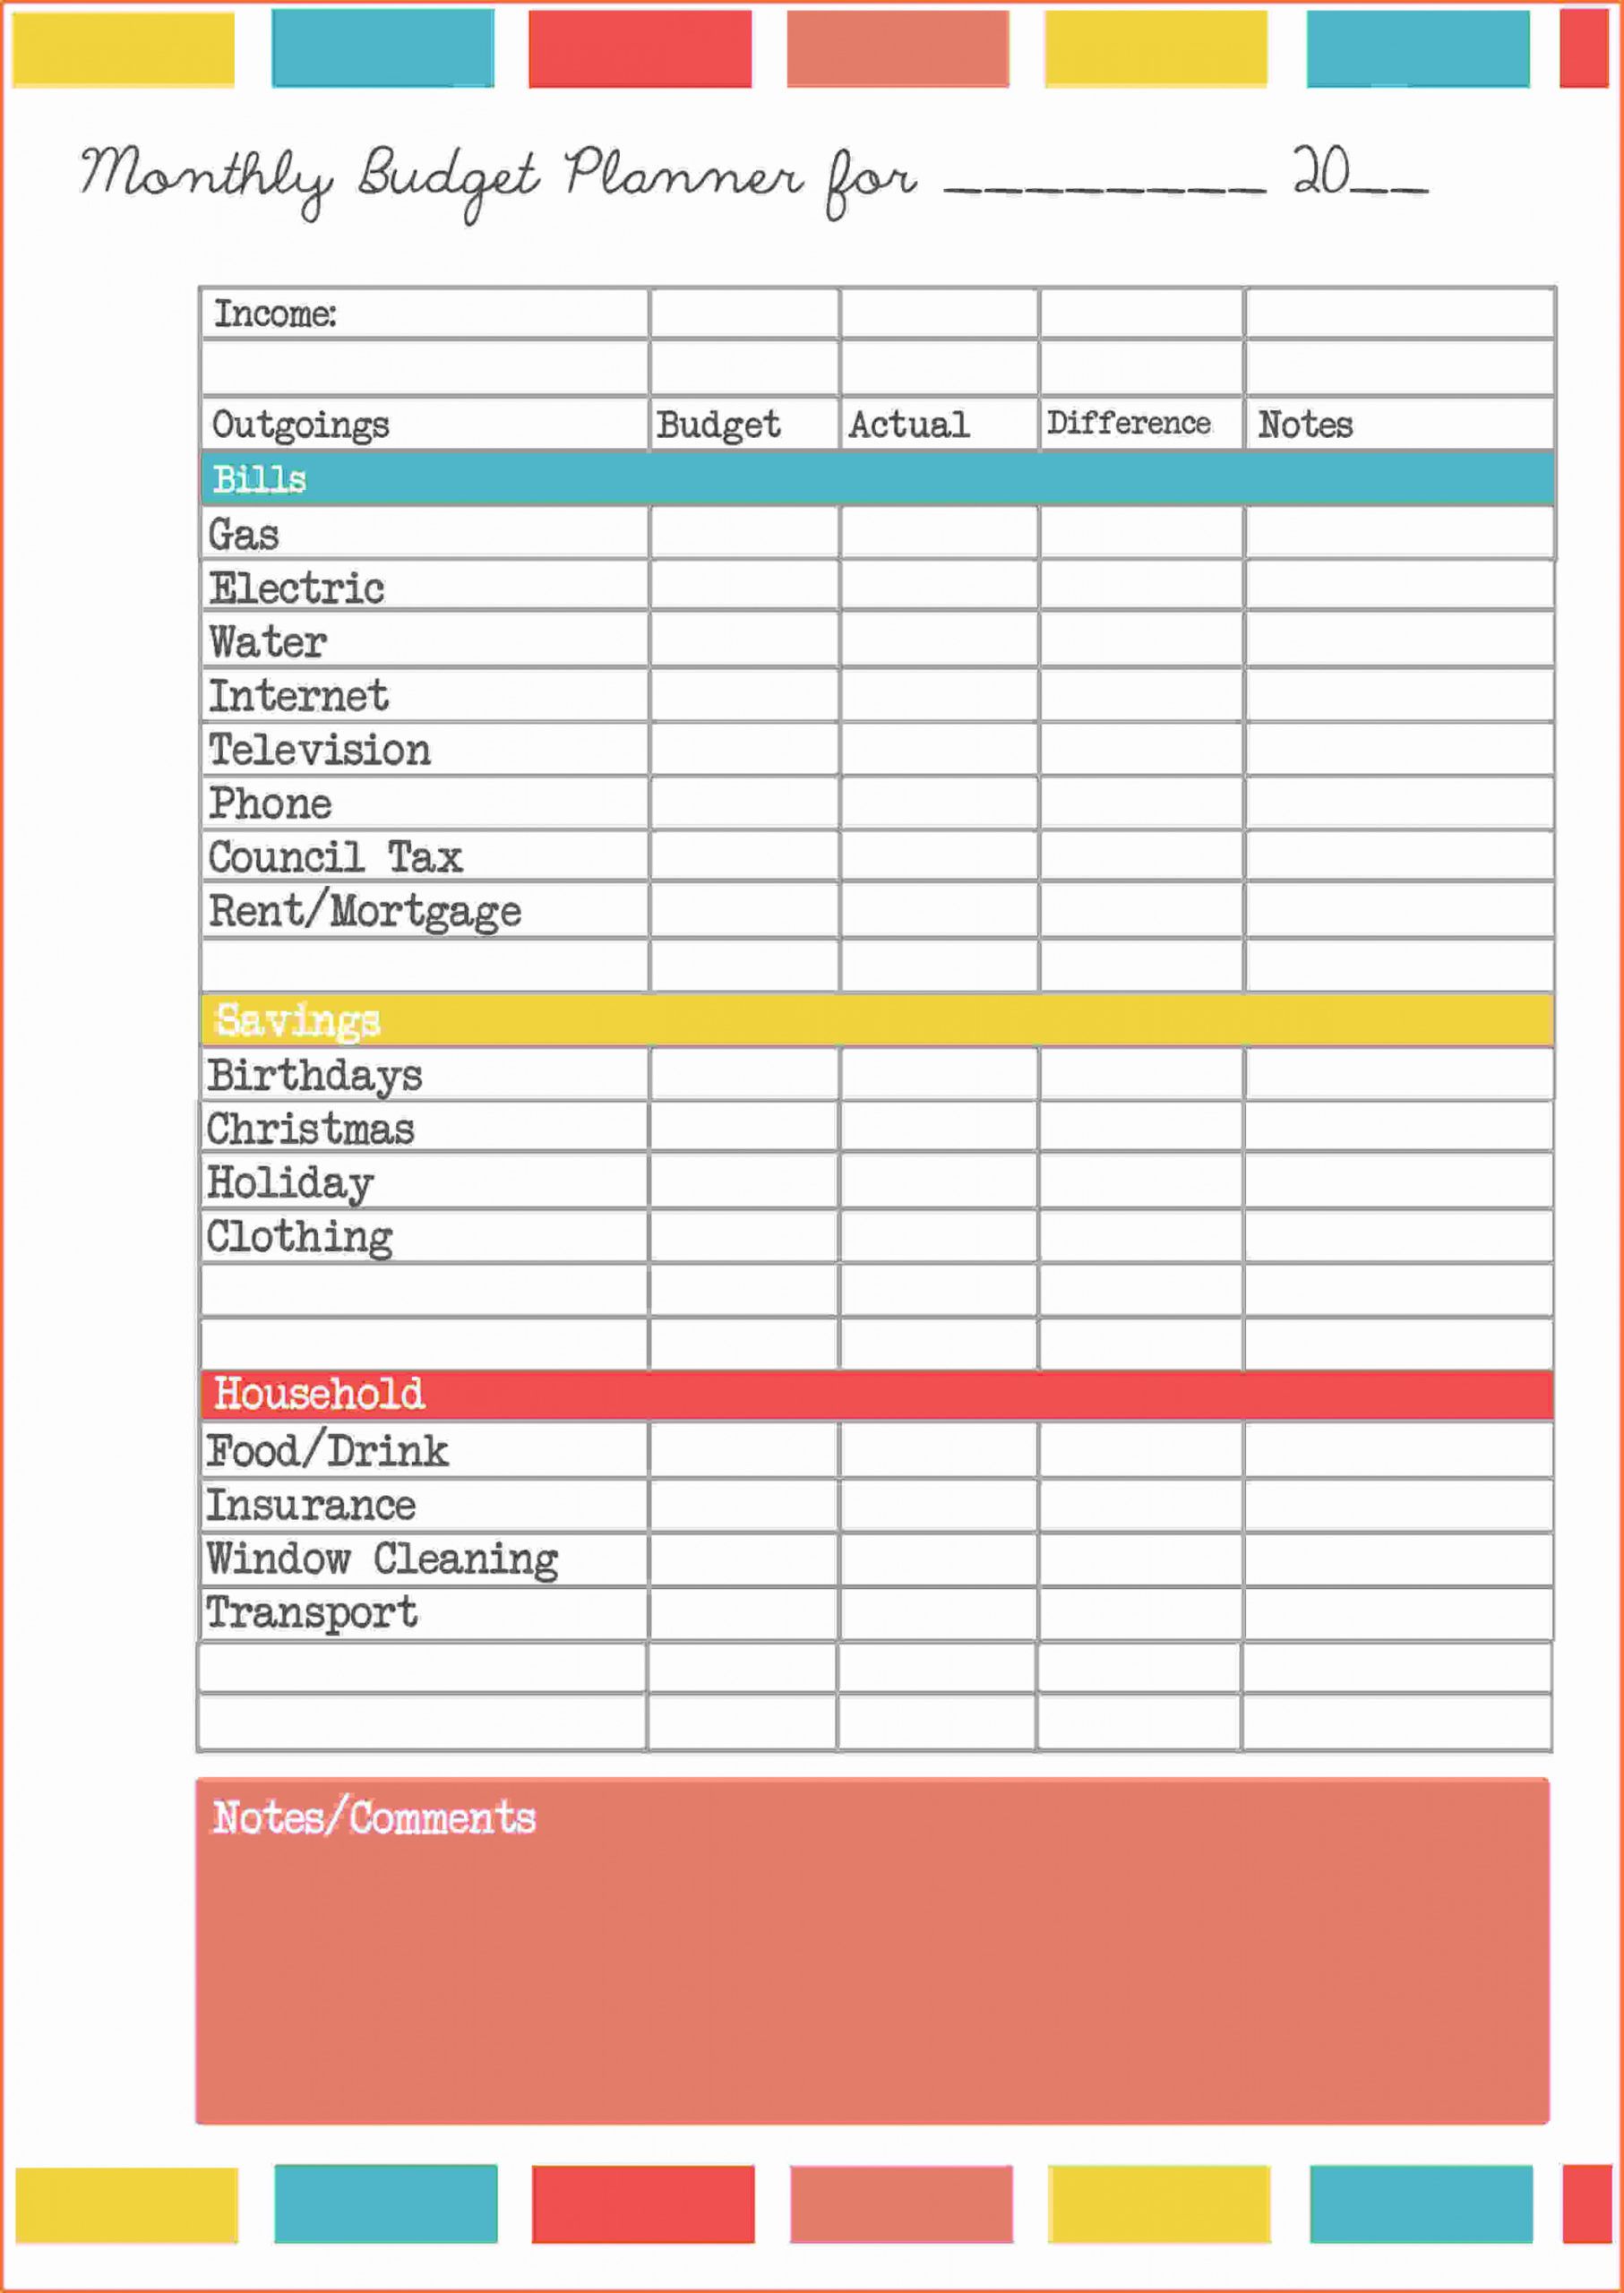 Printable Family Budget Free Spreadsheet Excel Basic Home Monthly Personal Household Budget 